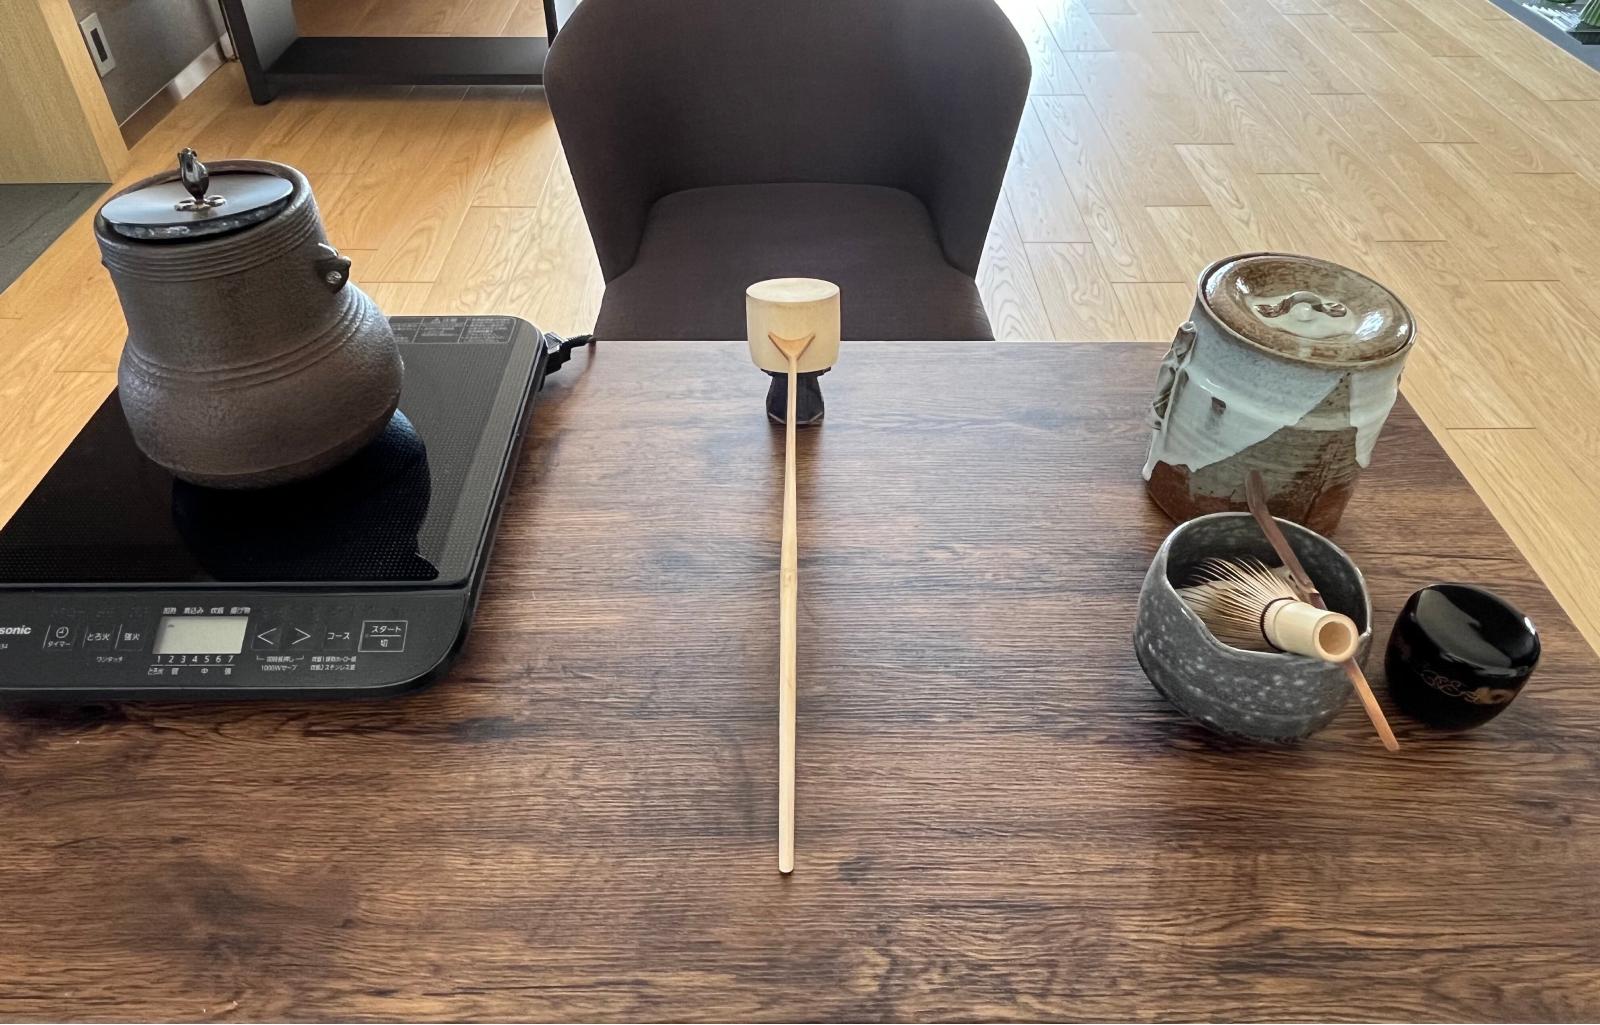 Tea utensils in Matsumoto's home, with a kettle on an induction stove to boil water